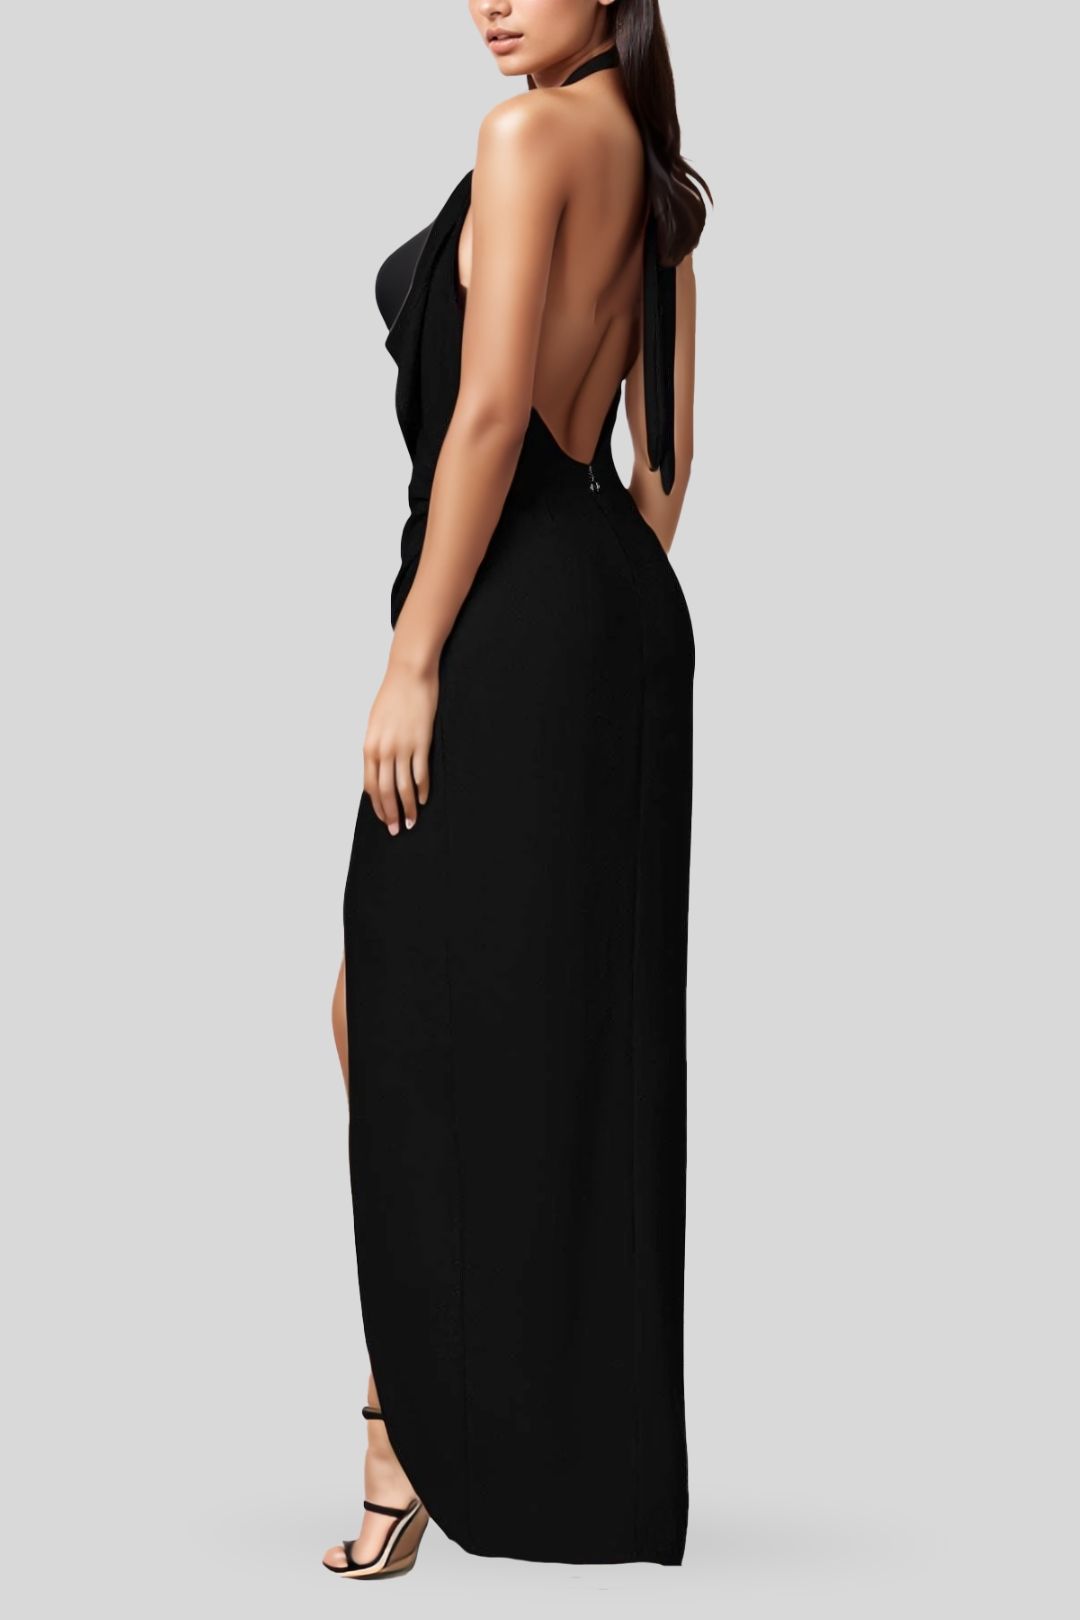 Nookie Amore Gown in Black